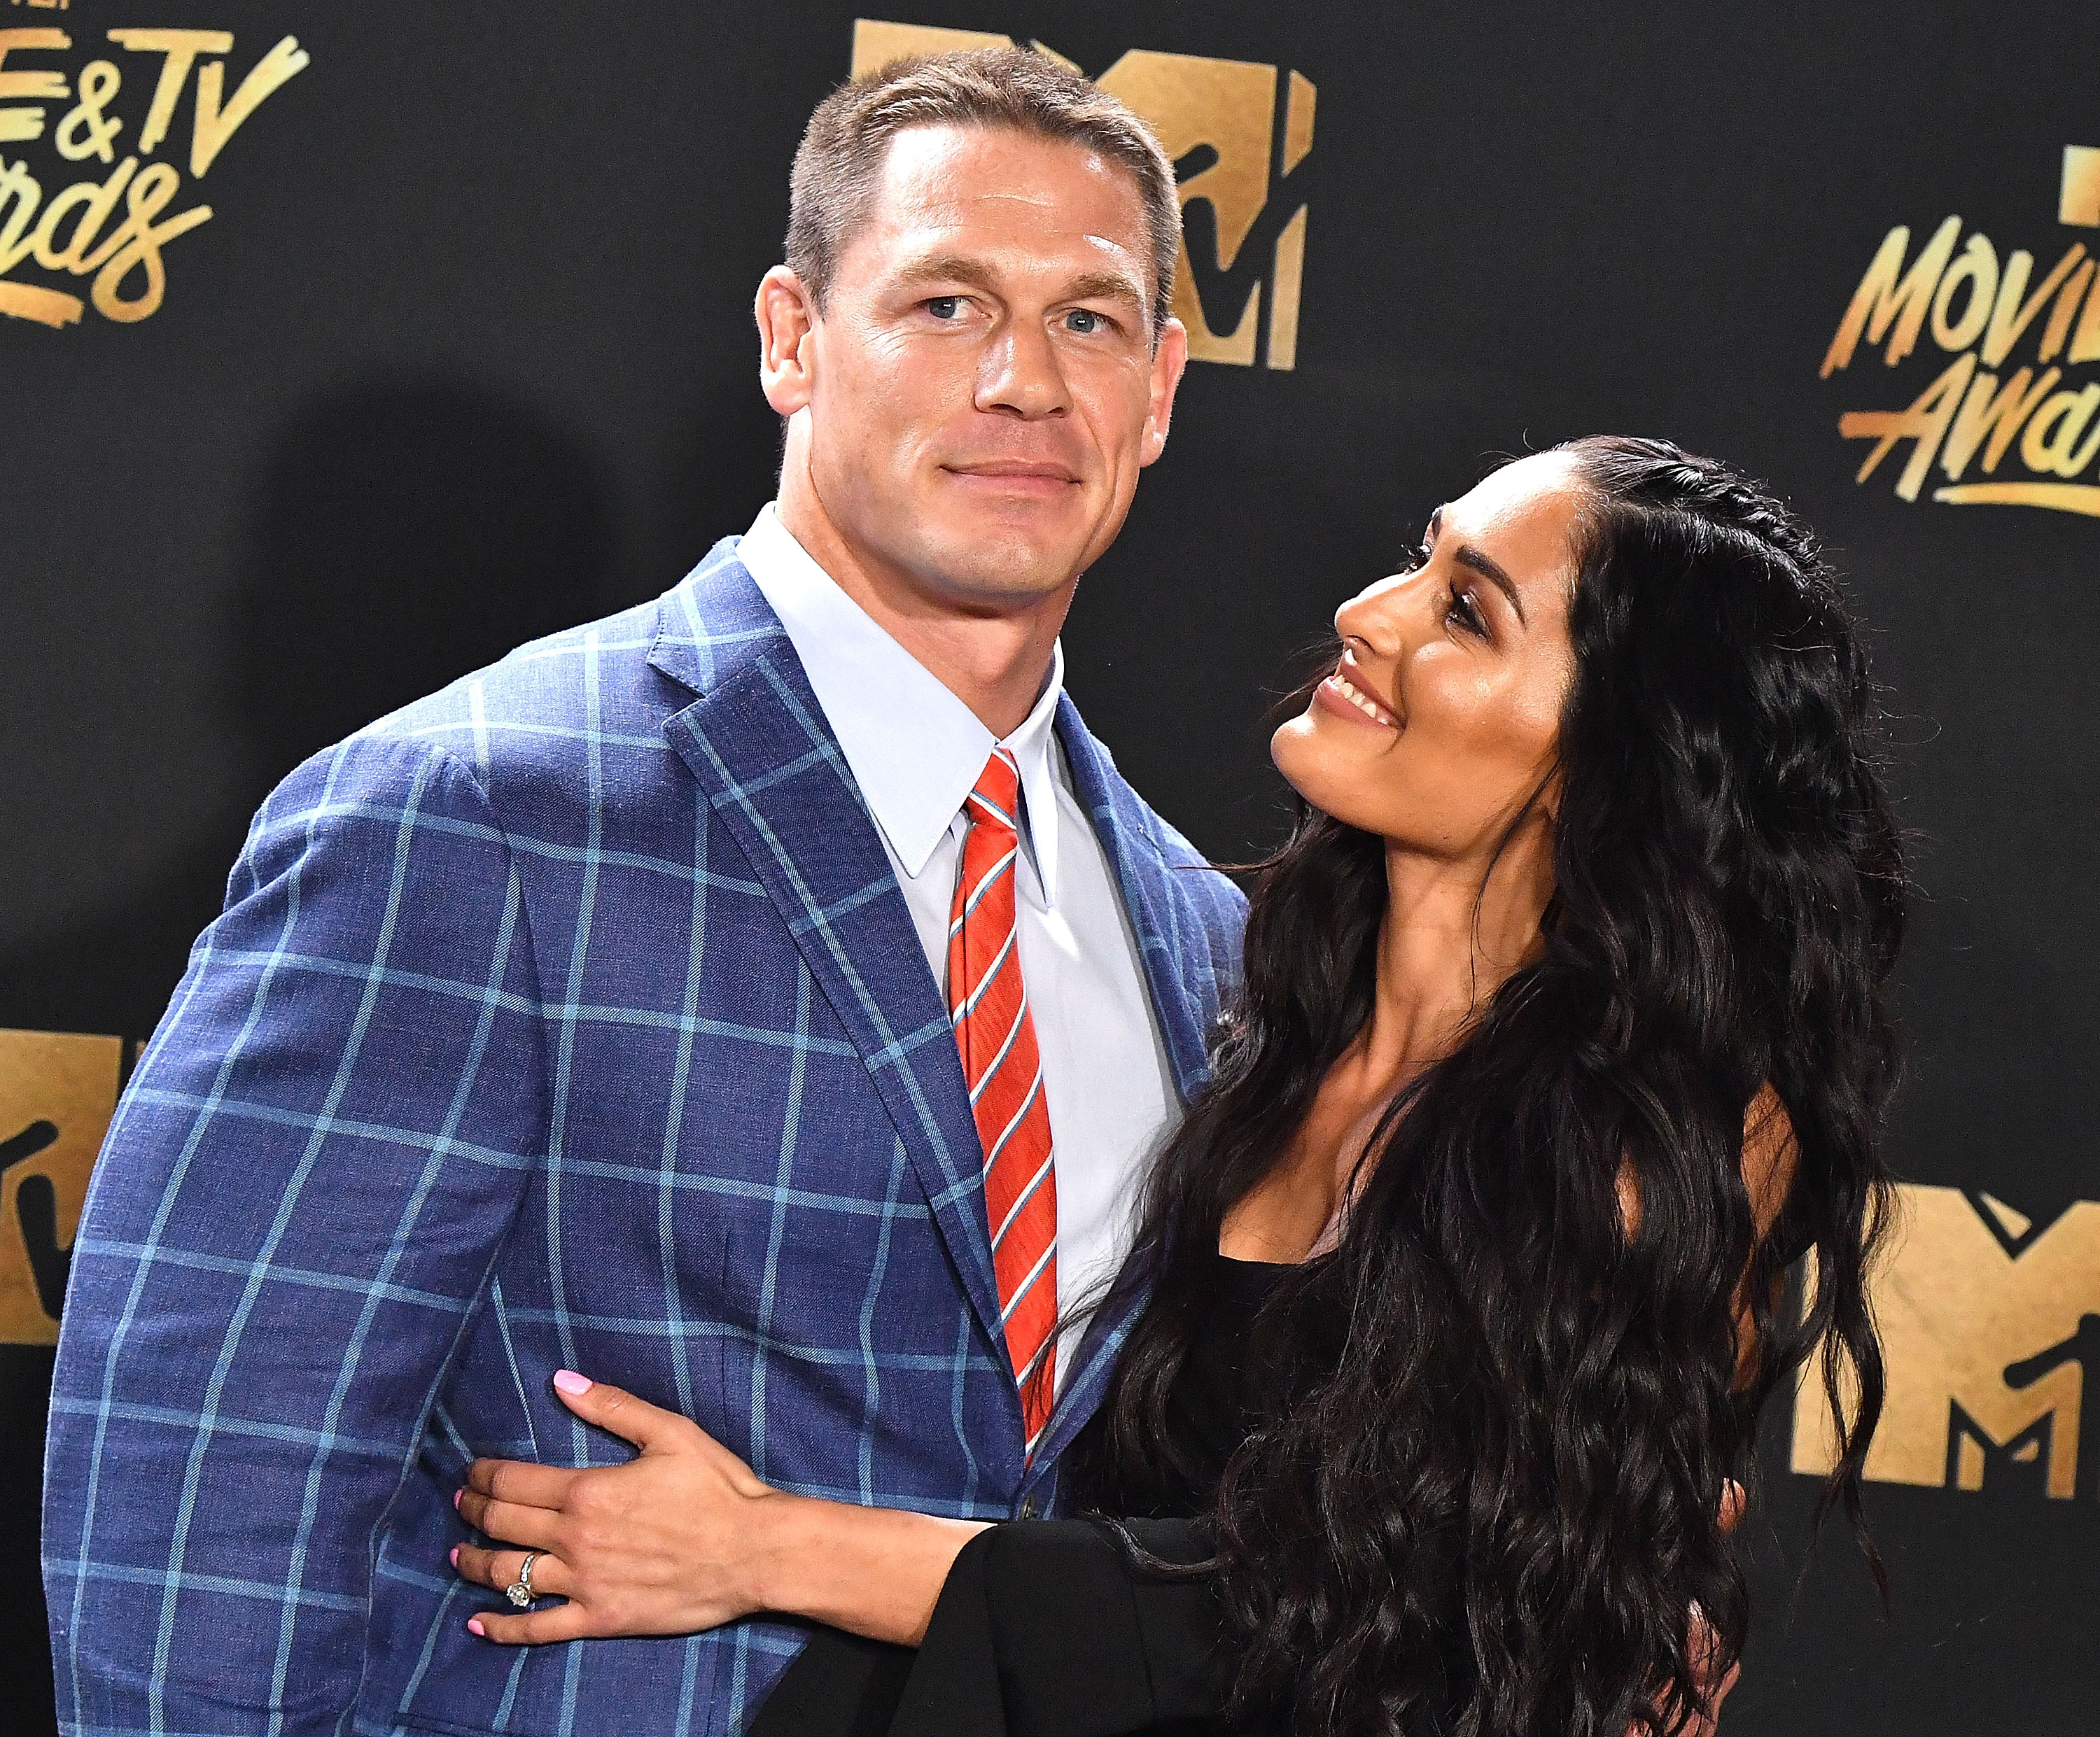 Are John Cena and Nikki Bella Married? Find out More About the Couple!